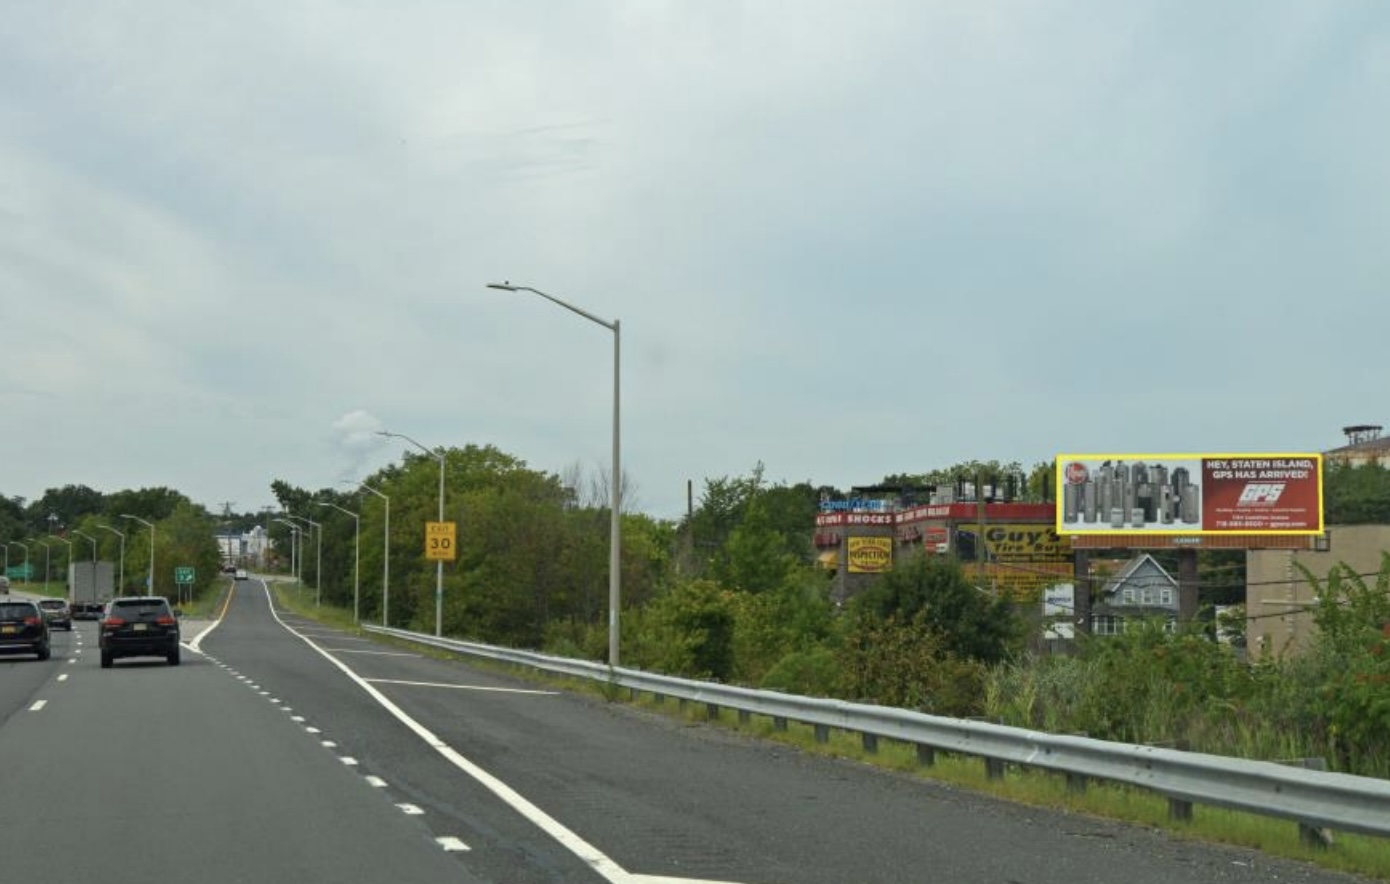 WEST SHORE EXPWY (RT 440) S/O EXIT 3 Media